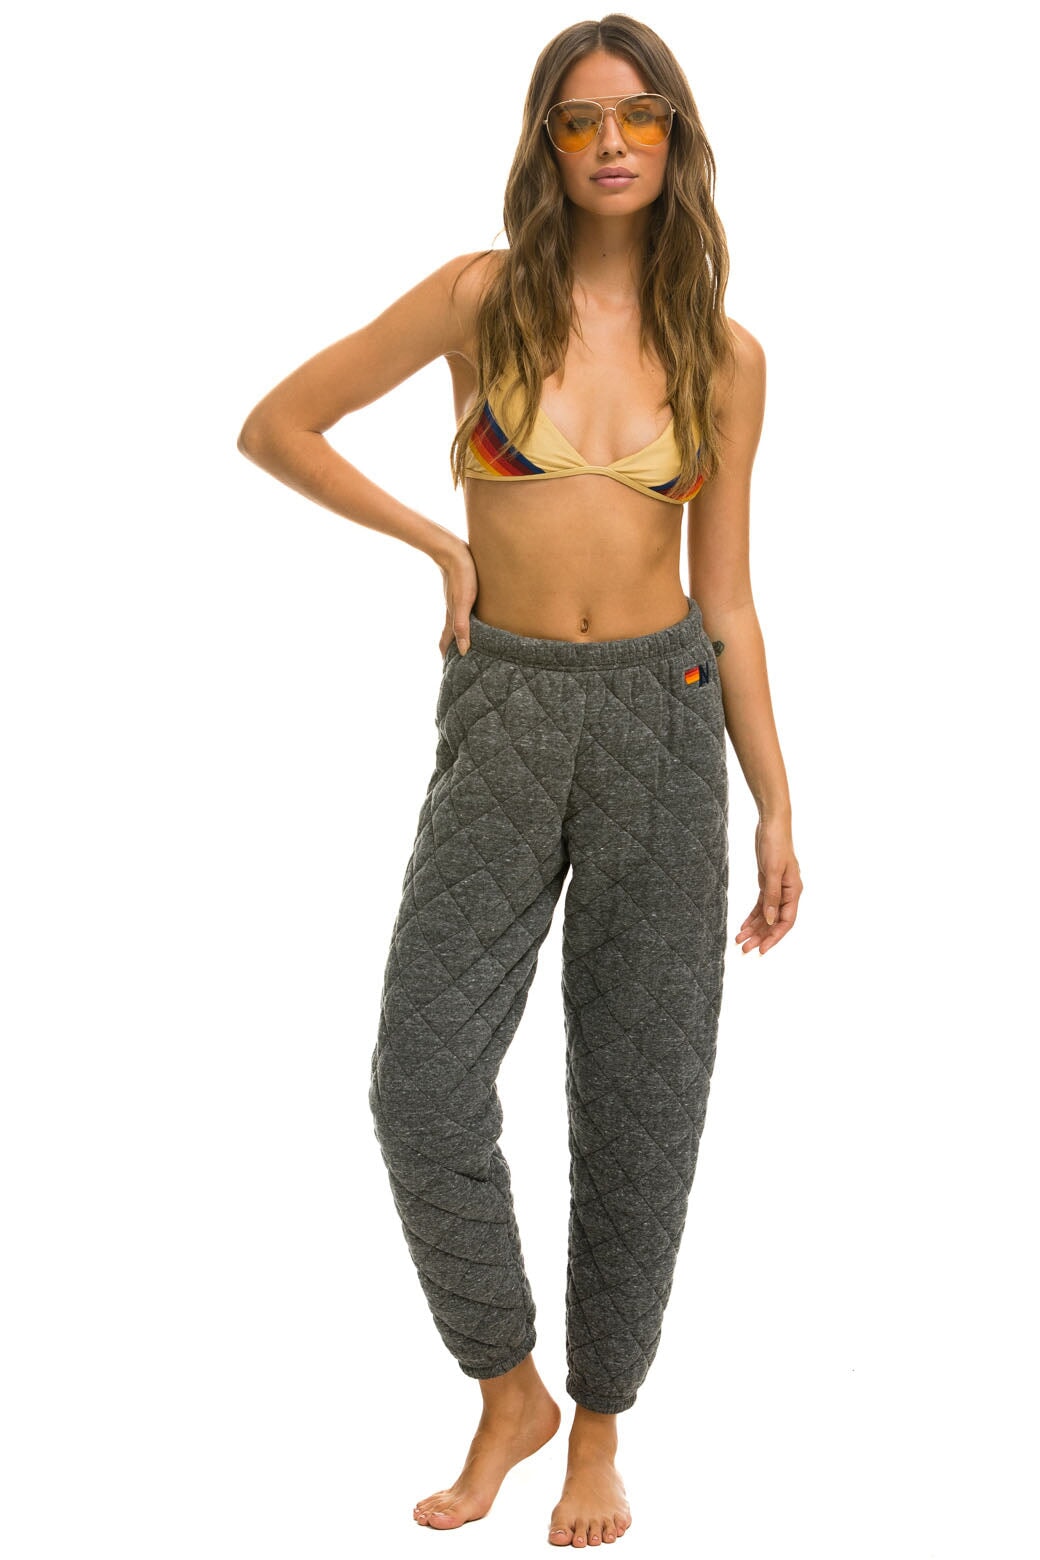 WOMEN'S QUILTED SWEATPANTS - HEATHER GREY Womens Sweatpants Aviator Nation 